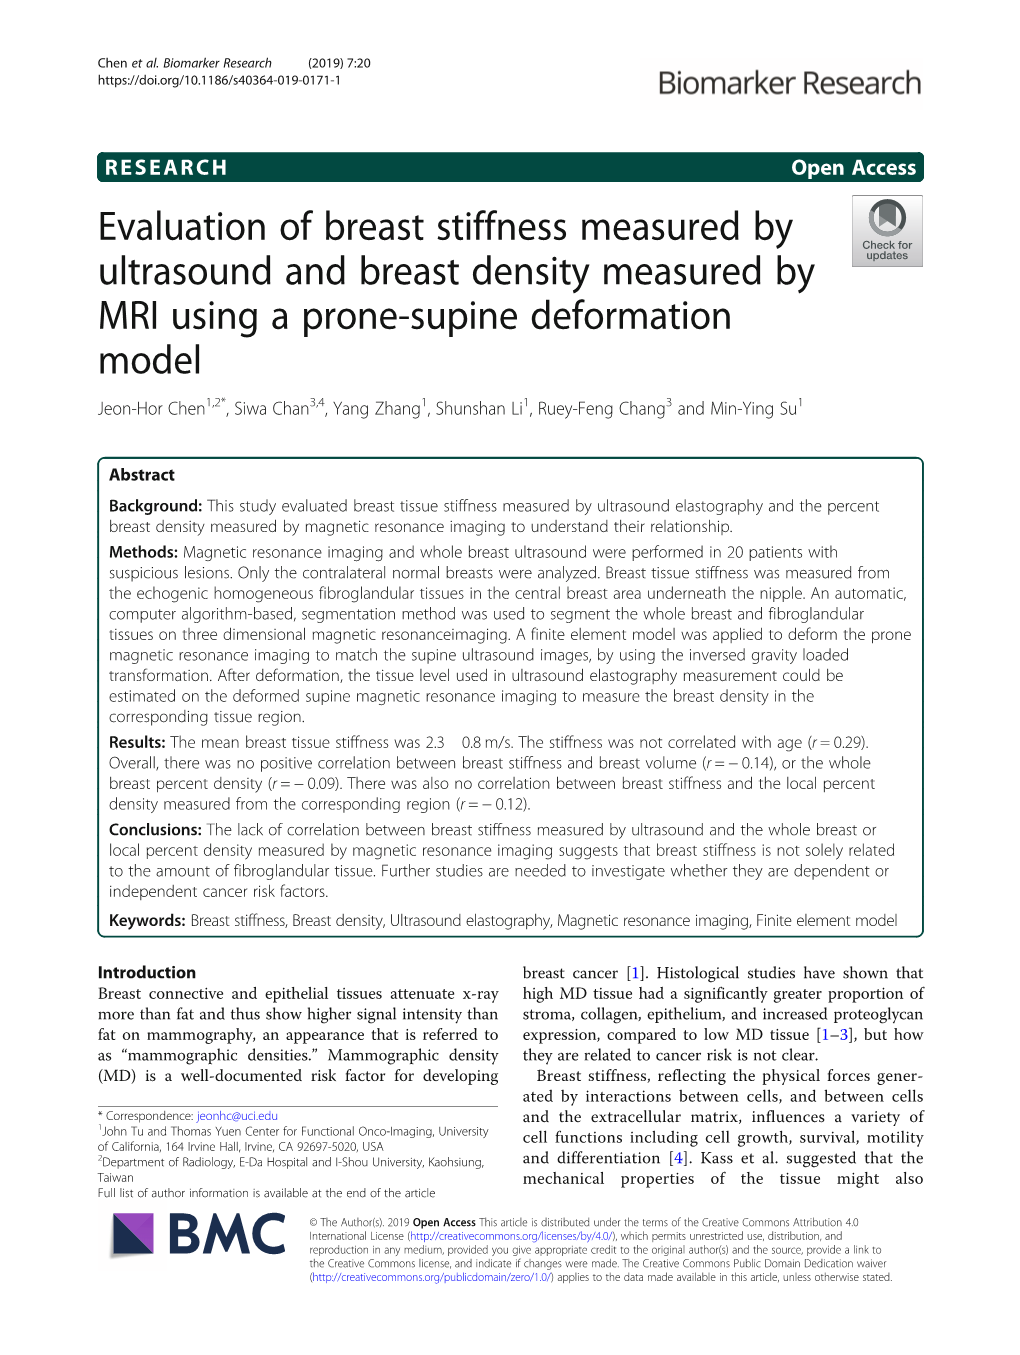 Evaluation of Breast Stiffness Measured by Ultrasound and Breast